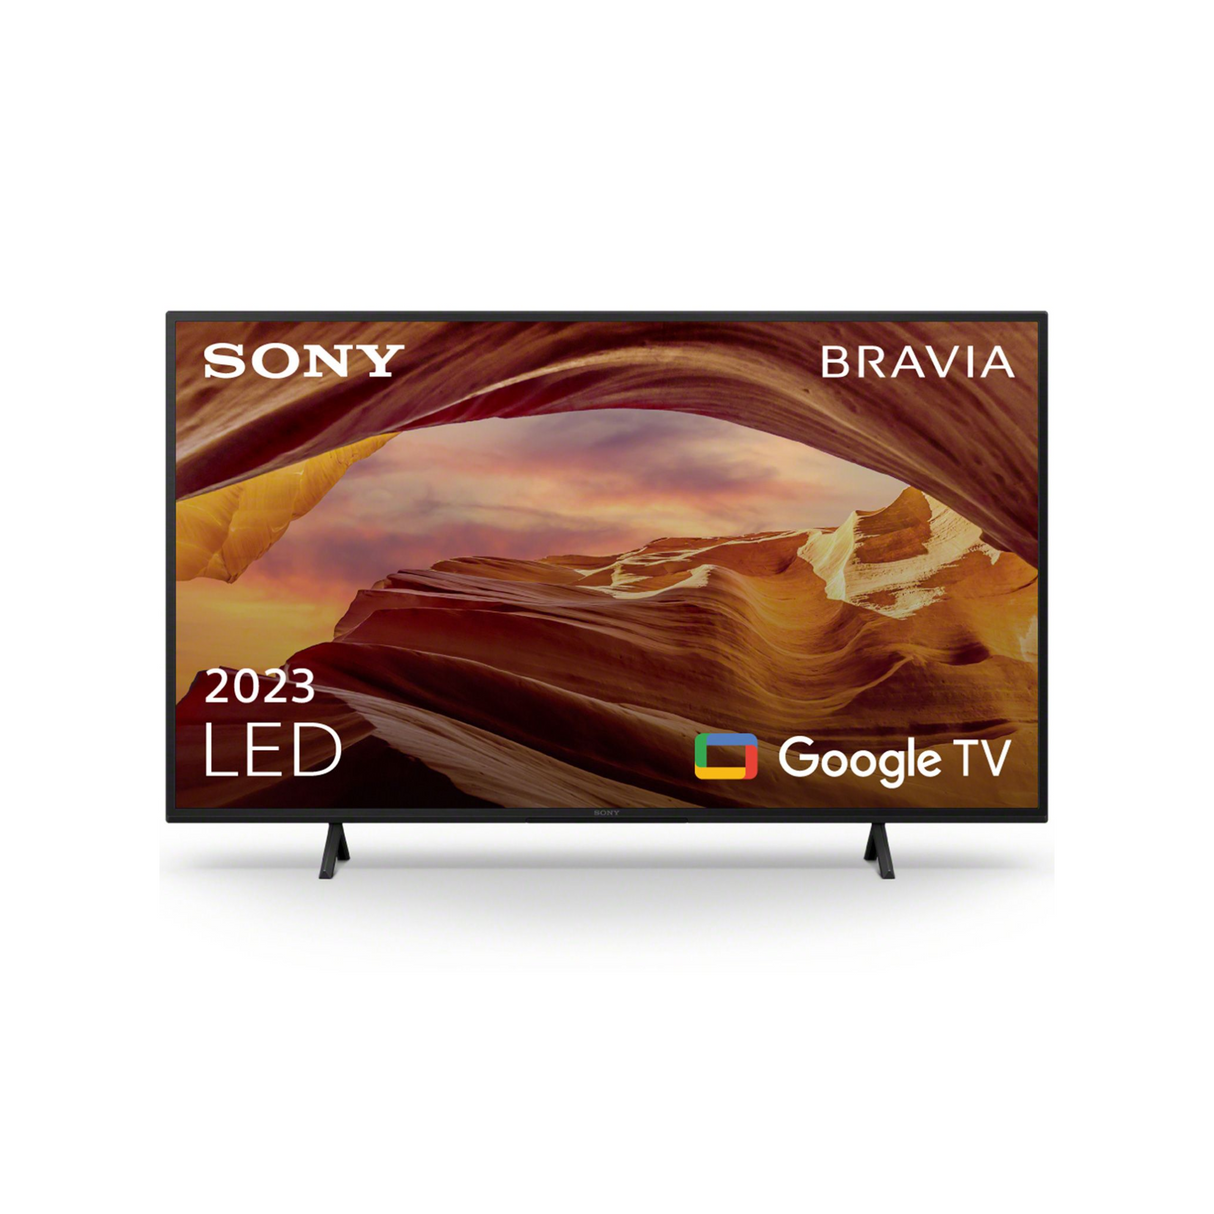 SONY BRAVIA KD-50X75WL 50" Smart 4K Ultra HD HDR LED TV with Google TV & Assistant